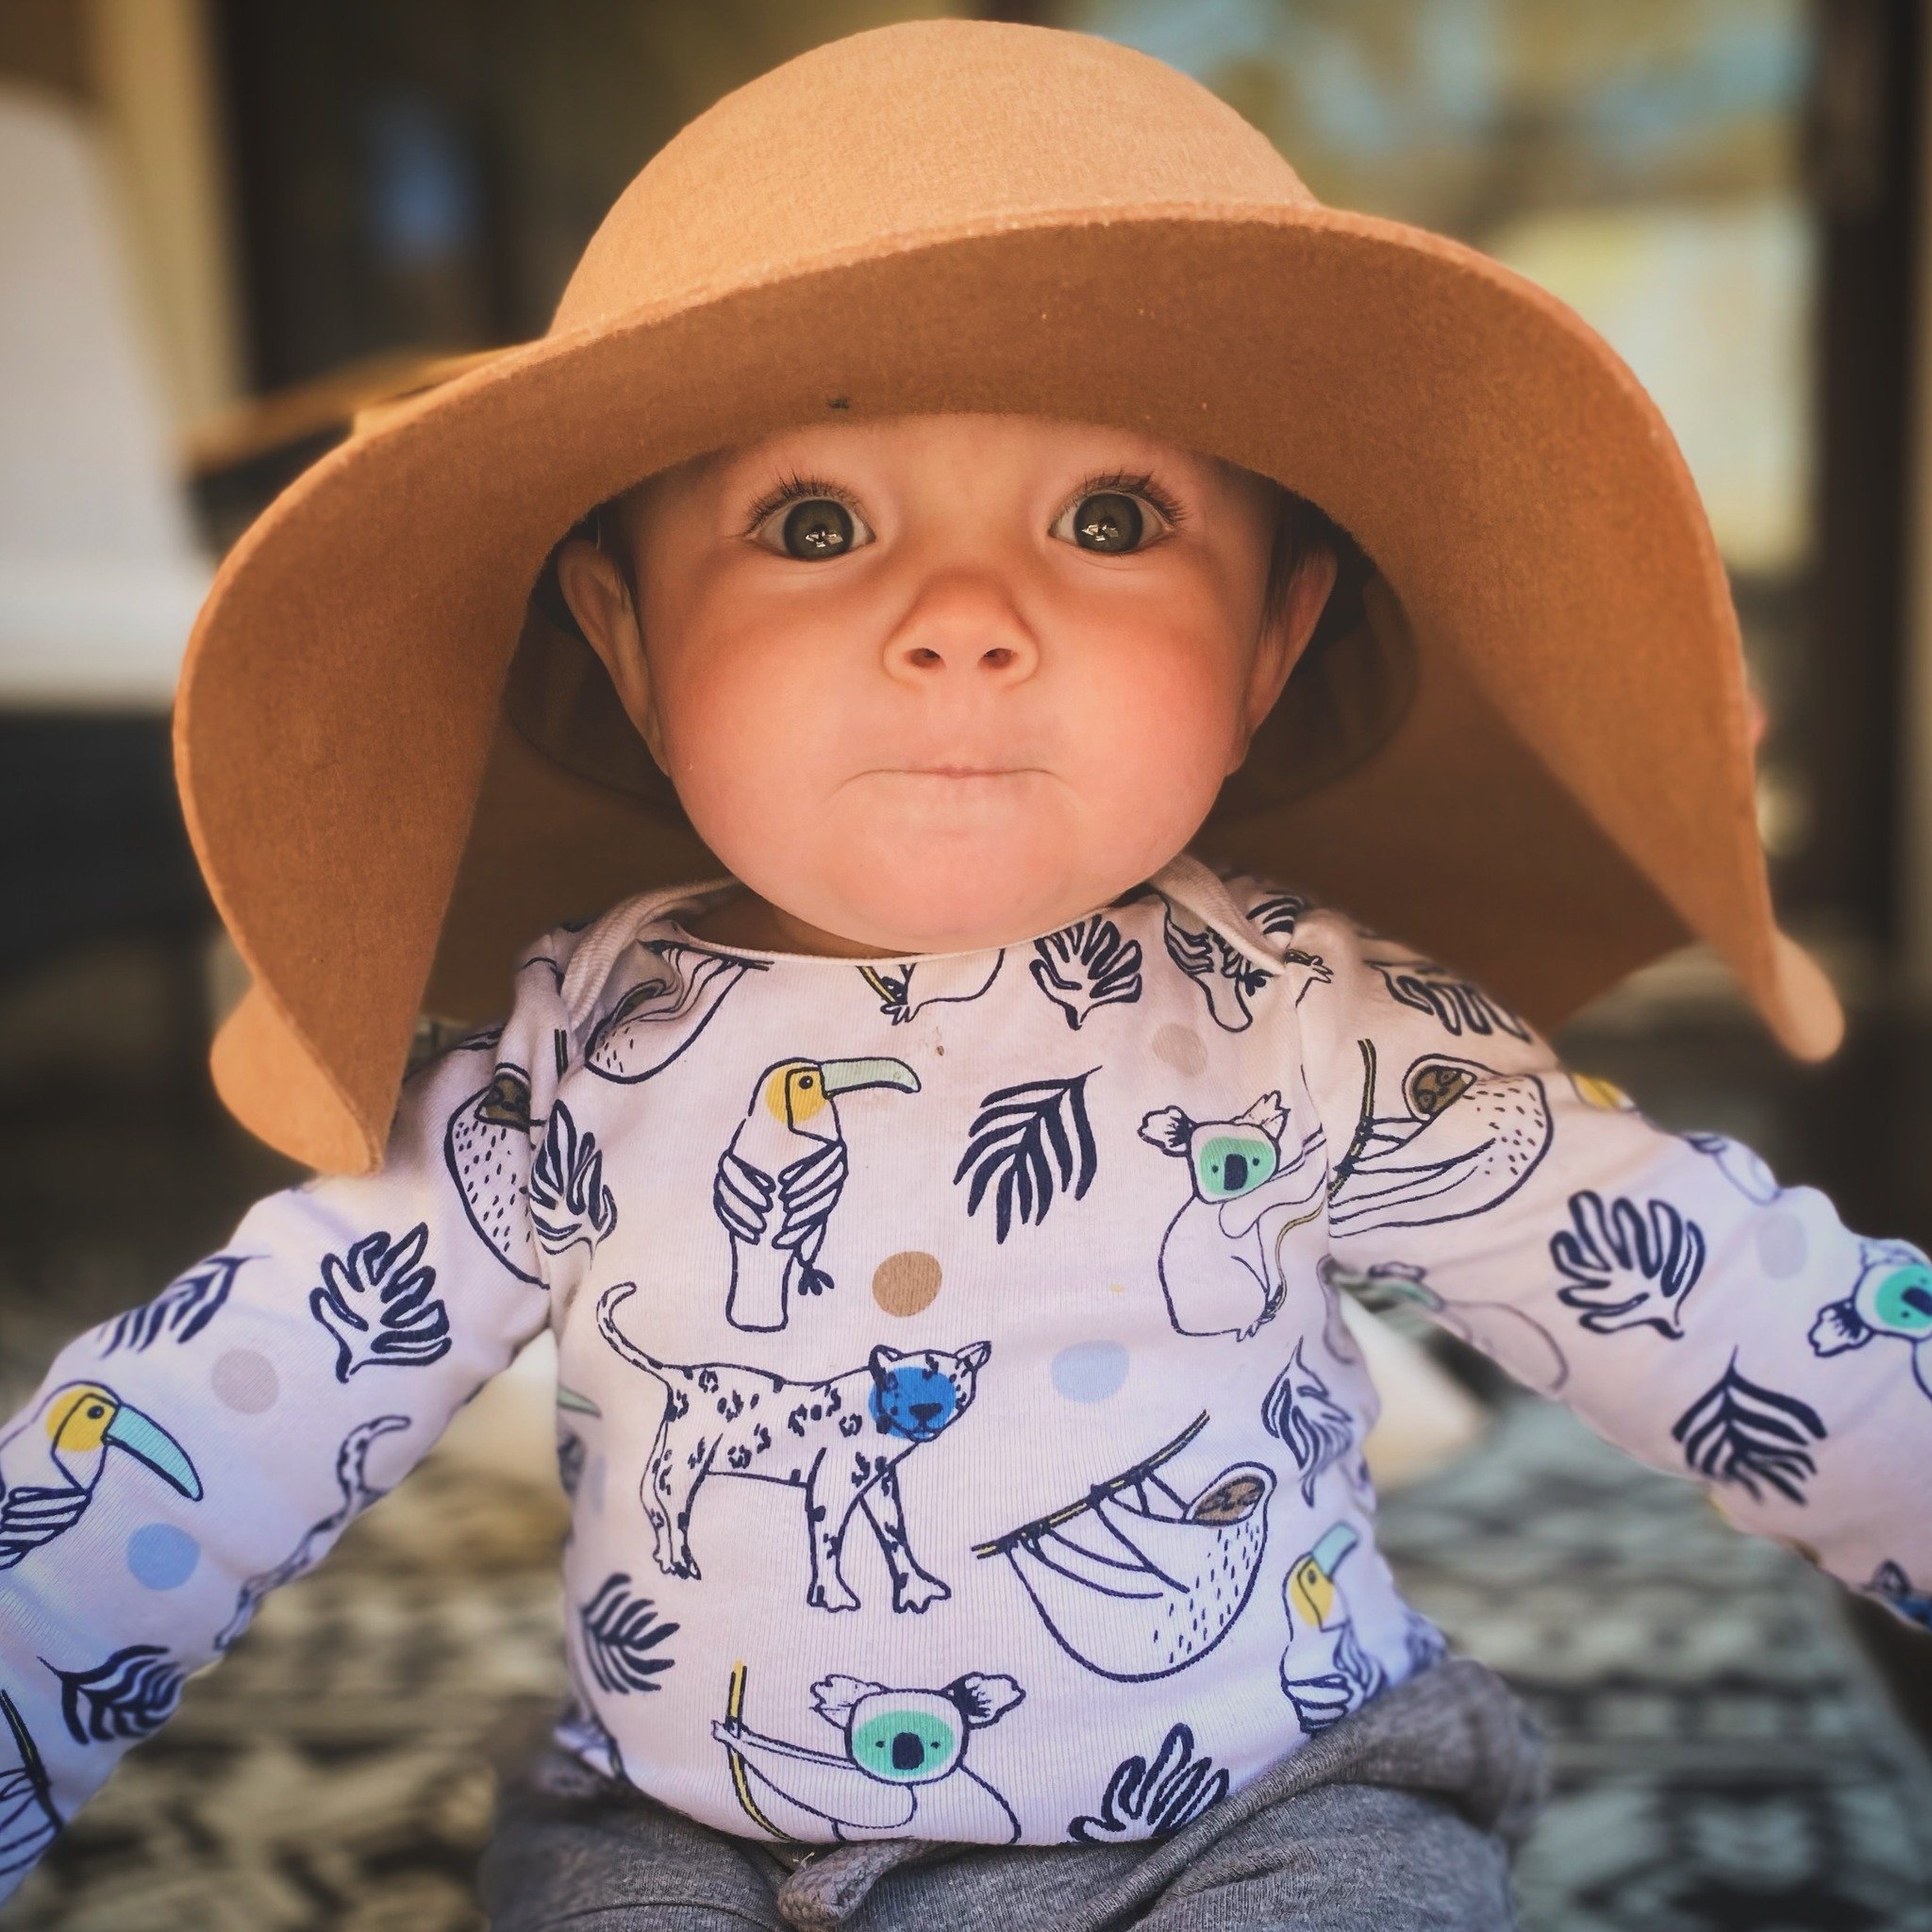 This is my 9-month-old, Bohdy David.

Real talk here, this kid just about didn&rsquo;t happen.

For YEARS my wife and kids have been wanting more children.

Oftentimes, I&rsquo;d come home from work and immediately be asked, &ldquo;Daddy, can we have